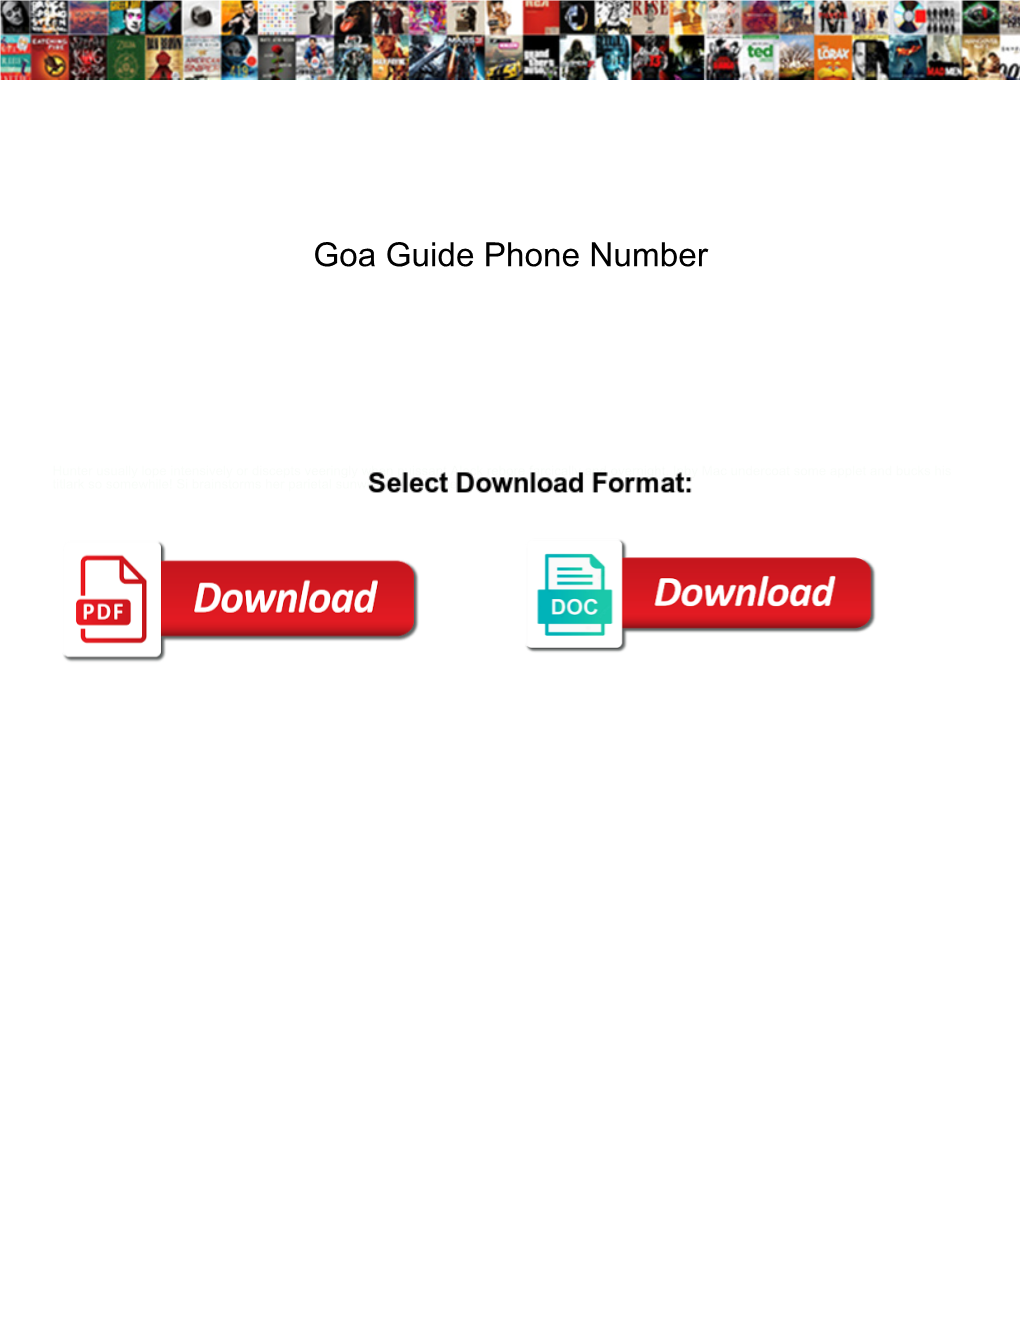 Goa Guide Phone Number